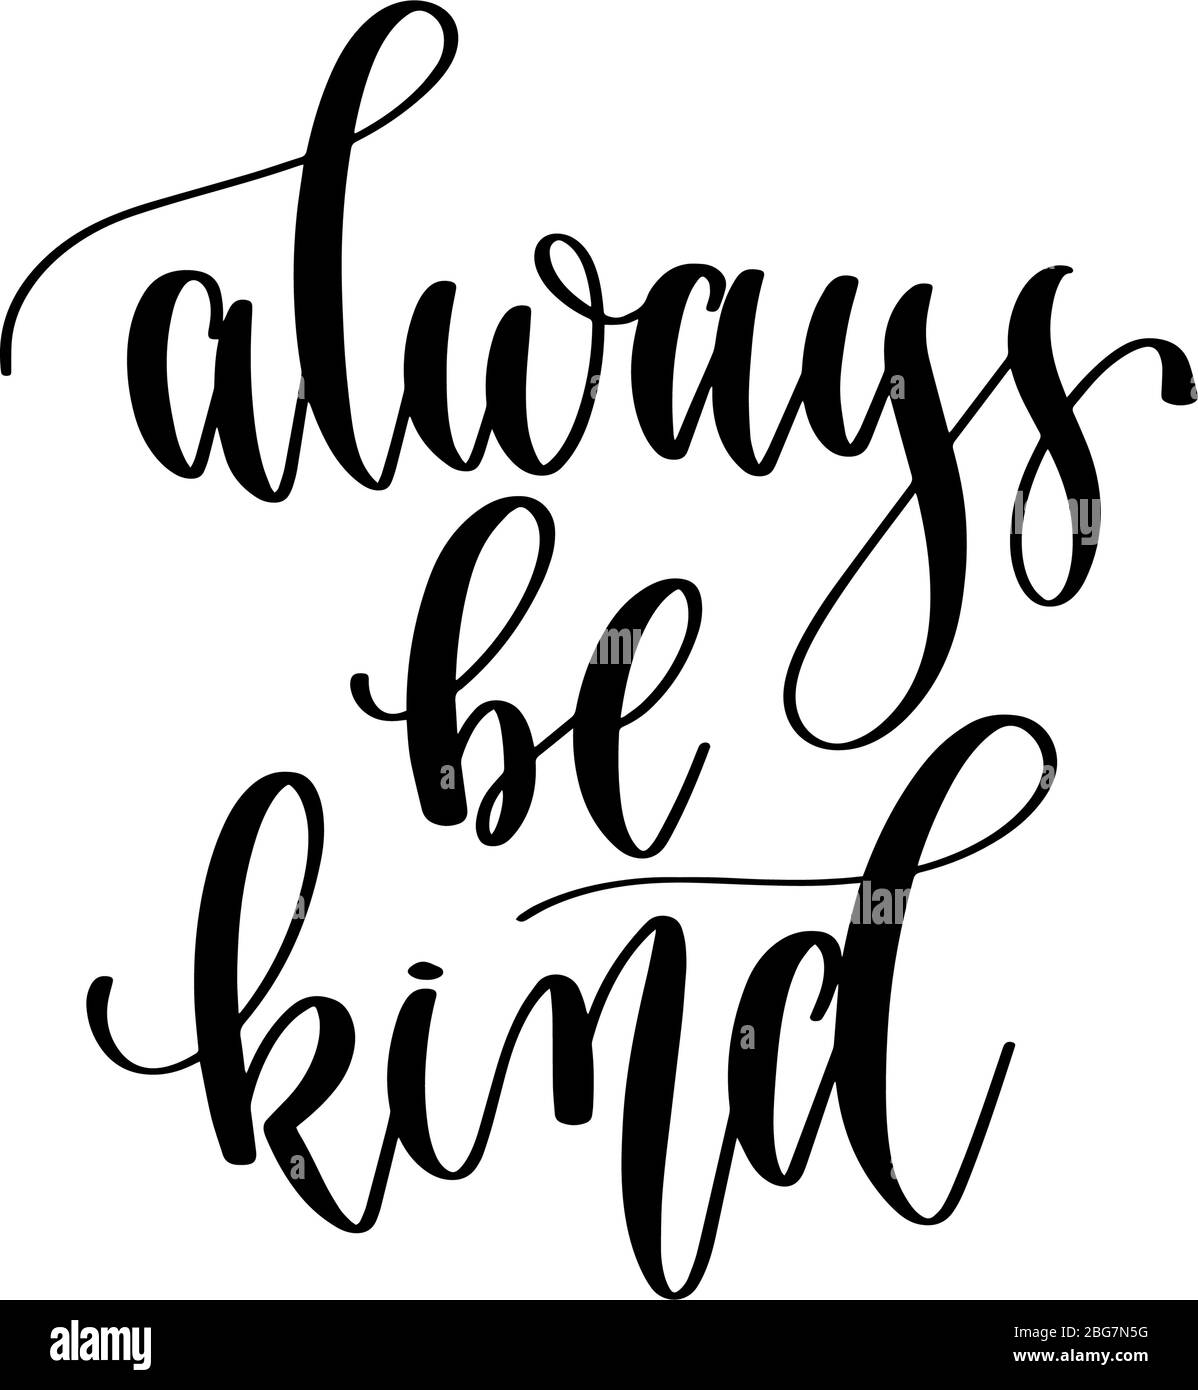 Always be kind Black and White Stock Photos & Images - Alamy